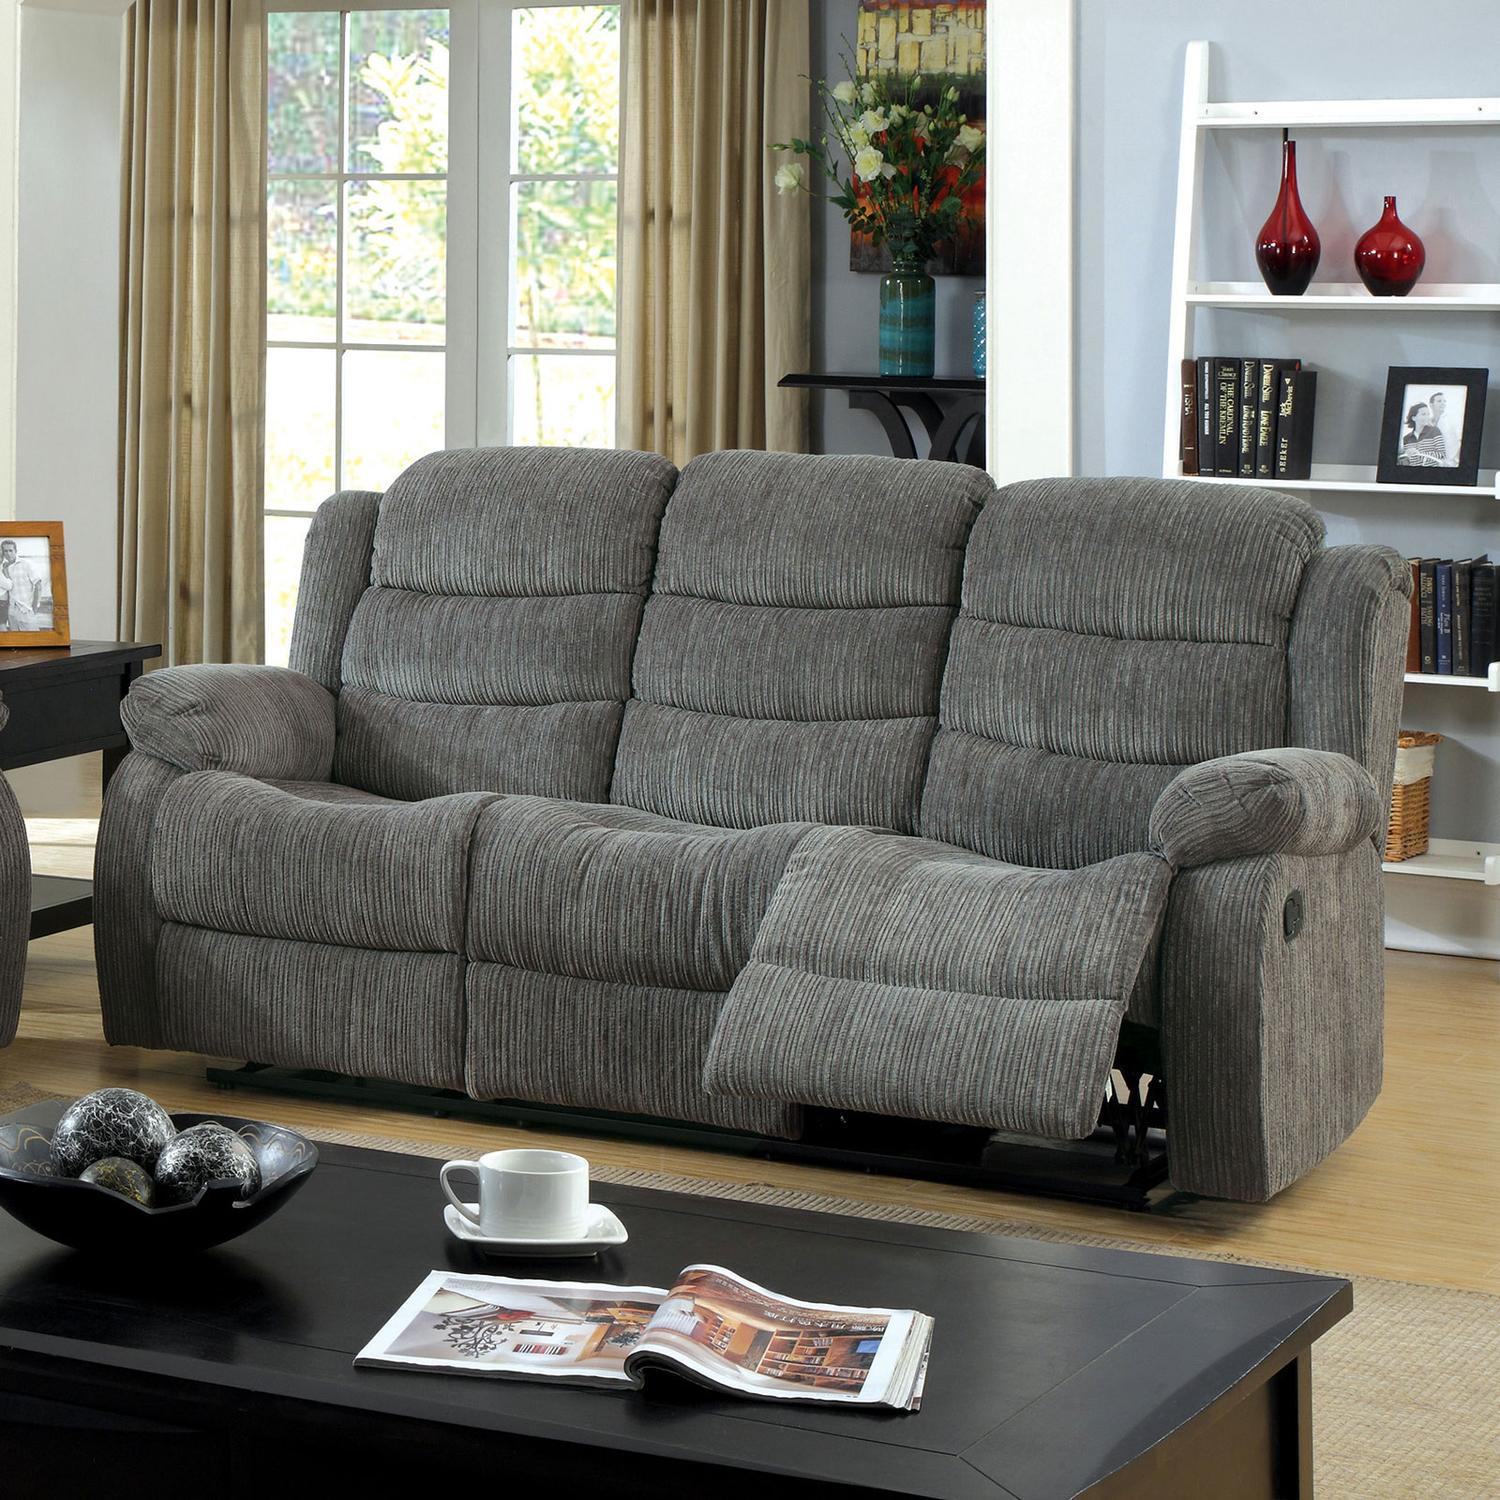 Transitional Recliner Sofa MILLVILLE CM6173GY-SF CM6173GY-SF in Gray Chenille